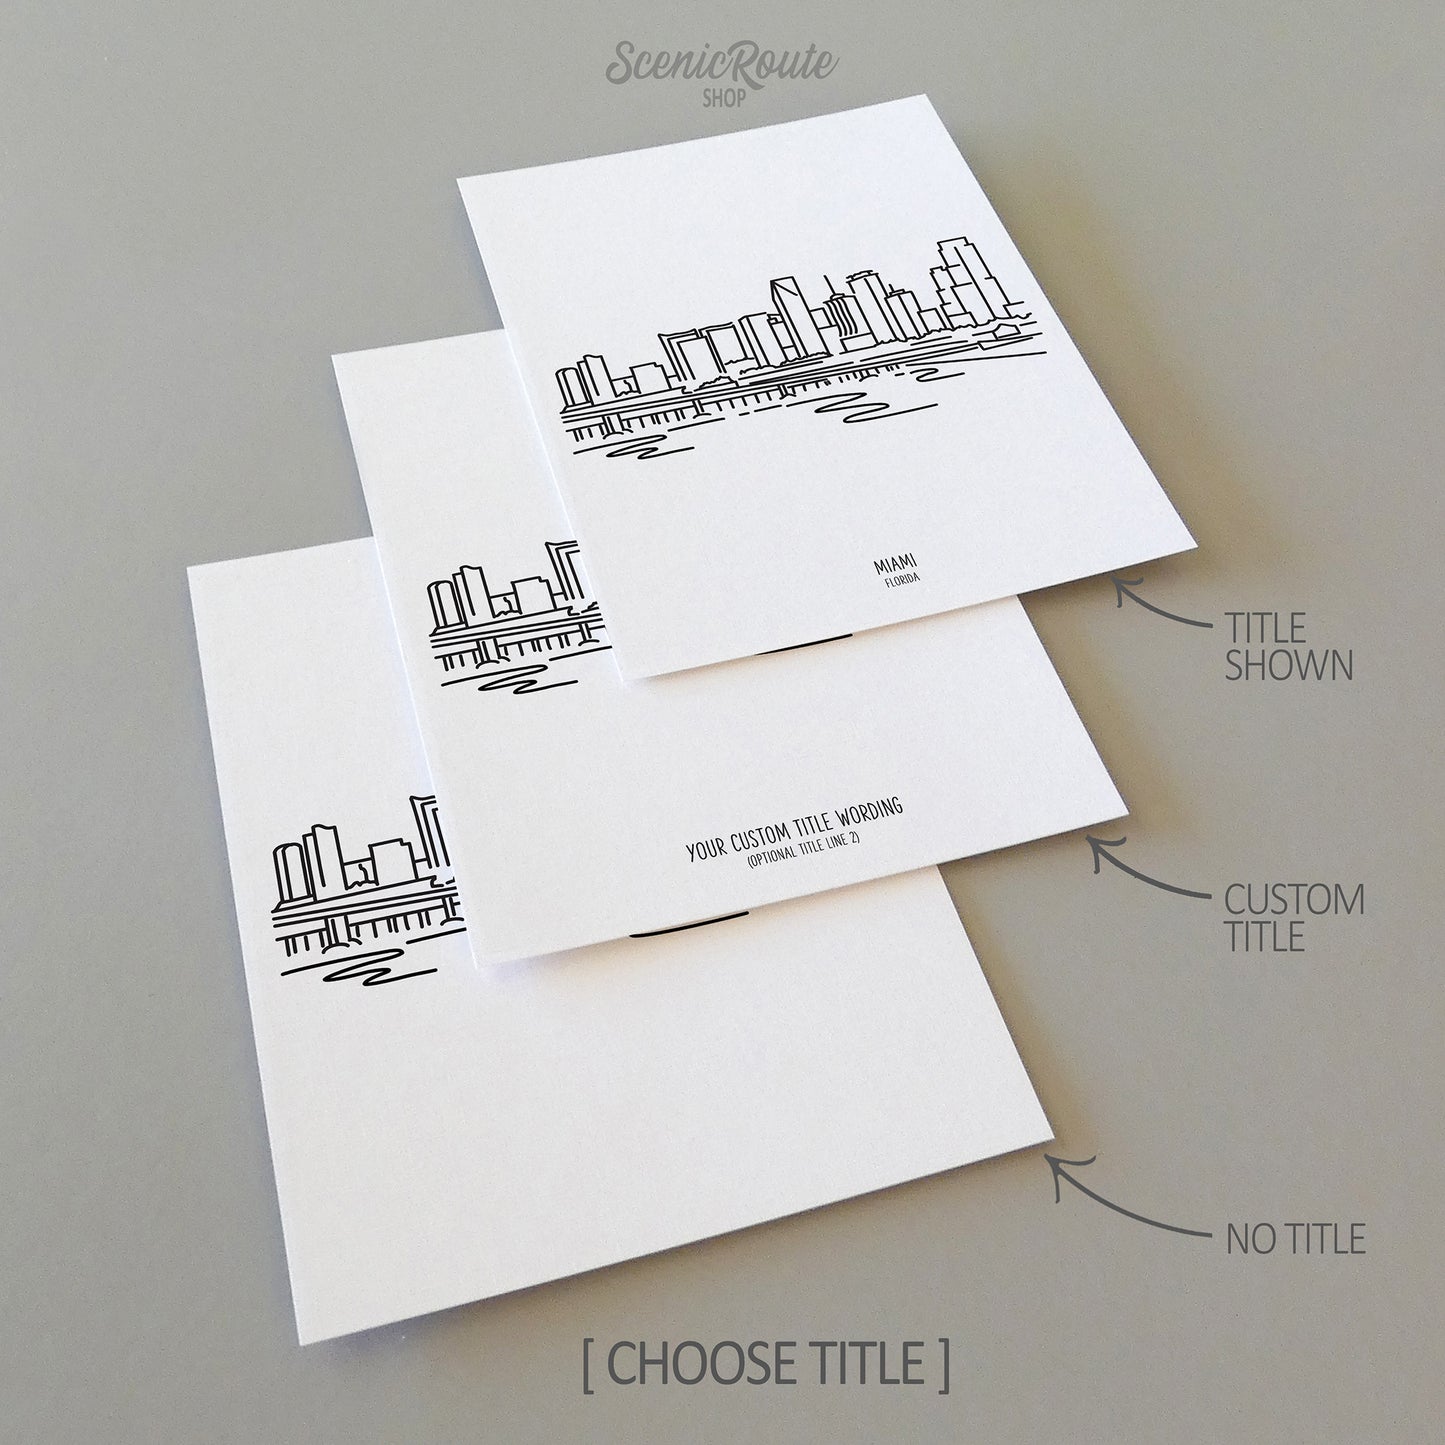 Three line art drawings of the Miami Florida Skyline on white linen paper with a gray background. The pieces are shown with title options that can be chosen and personalized.